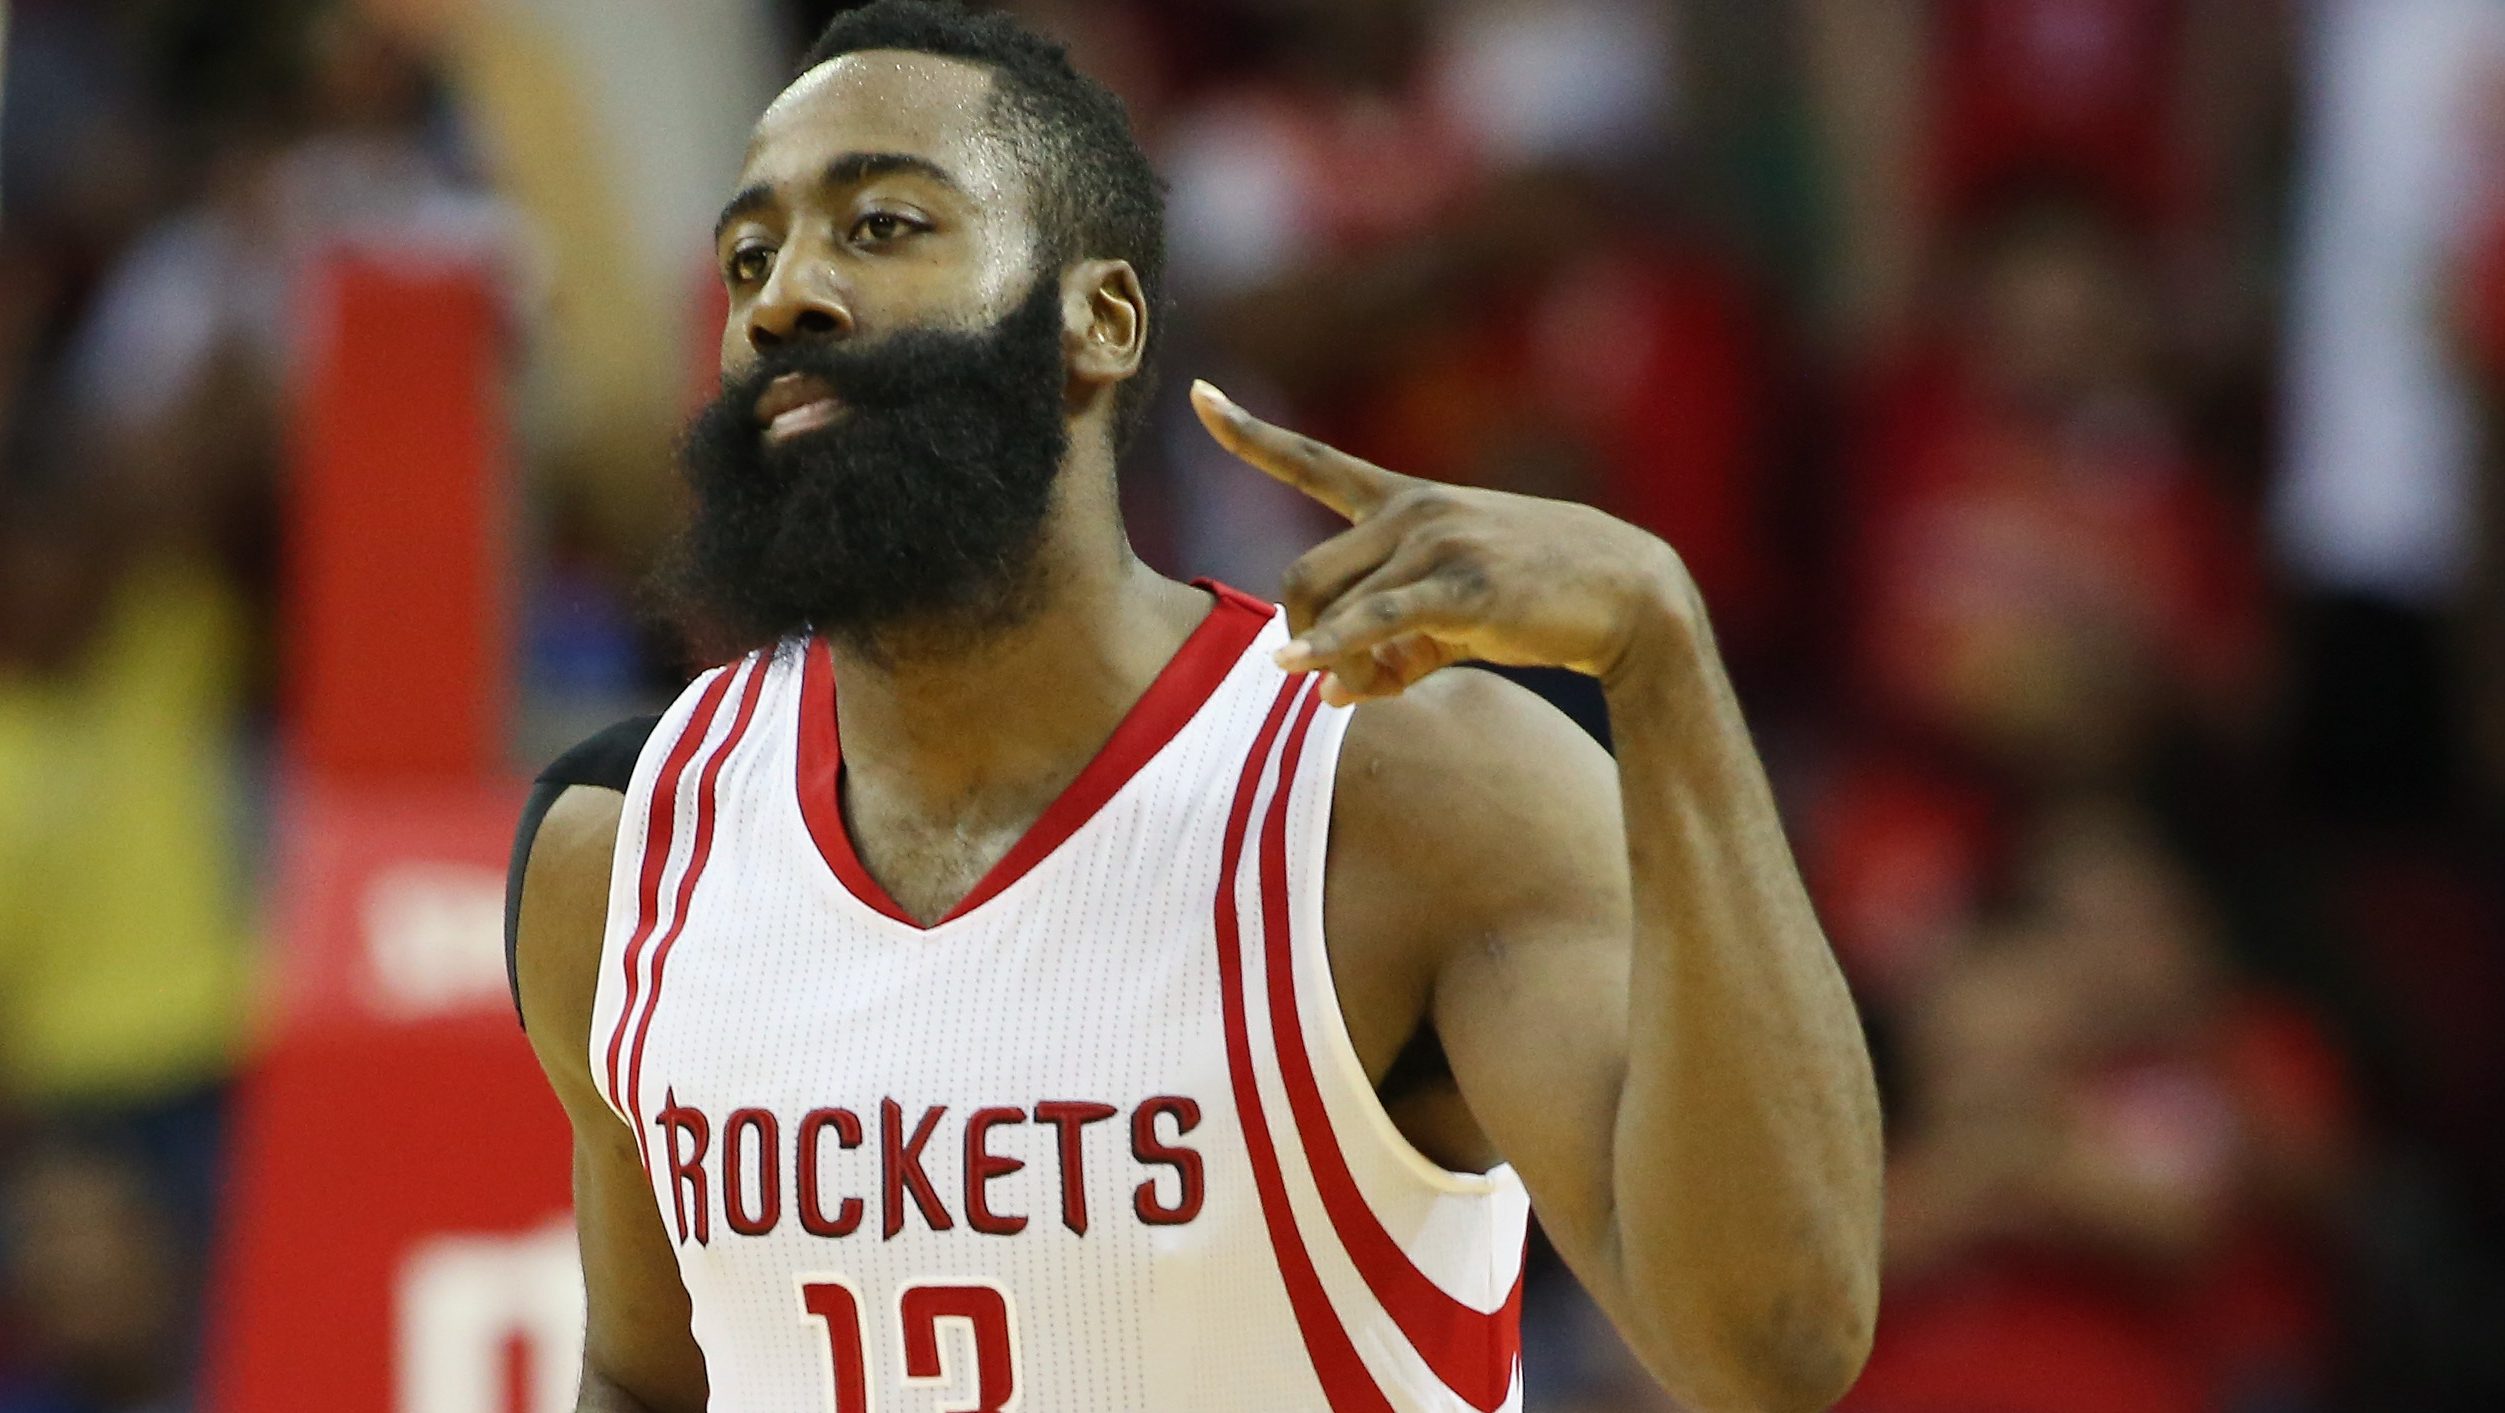 Houston Rockets sign James Harden to NBA-record $228m contract extension, Houston Rockets